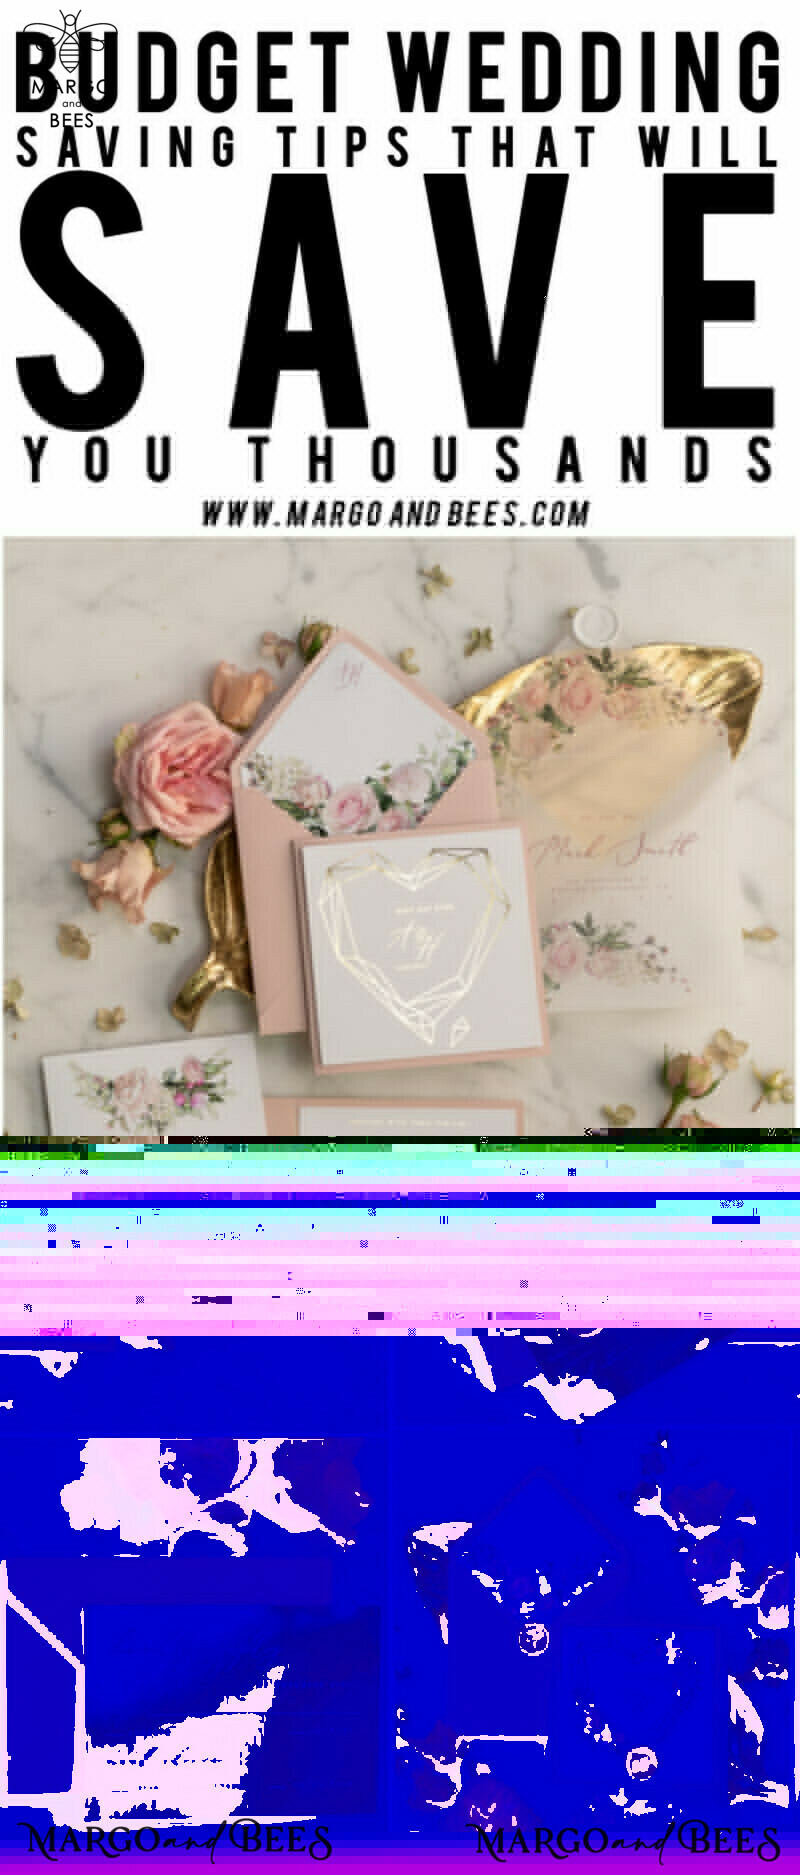 Glamour Gold Foil Wedding Invitations: Luxury Golden Shine with Elegant Blush Pink and Bespoke Floral Wedding Invitation Suite-15